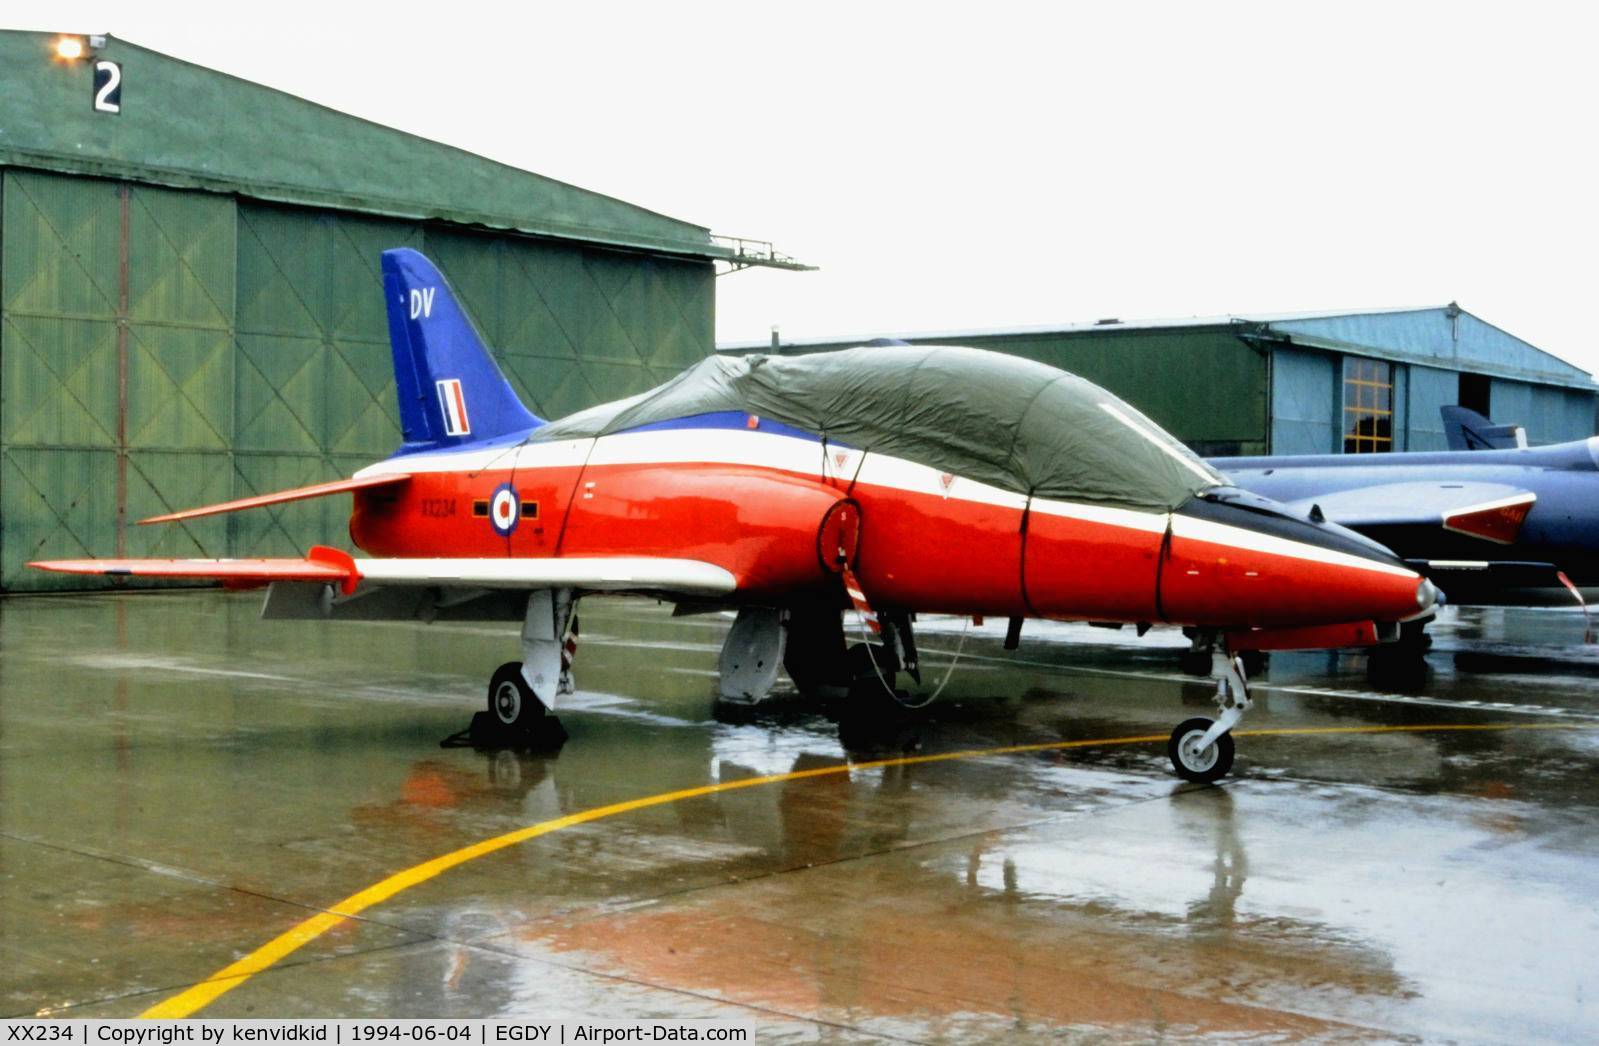 XX234, 1978 Hawker Siddeley Hawk T.1 C/N 070/312070, On static display at the RNAS Yeovilton 1994 50th Anniversary of D Day photocall. It rained all day.